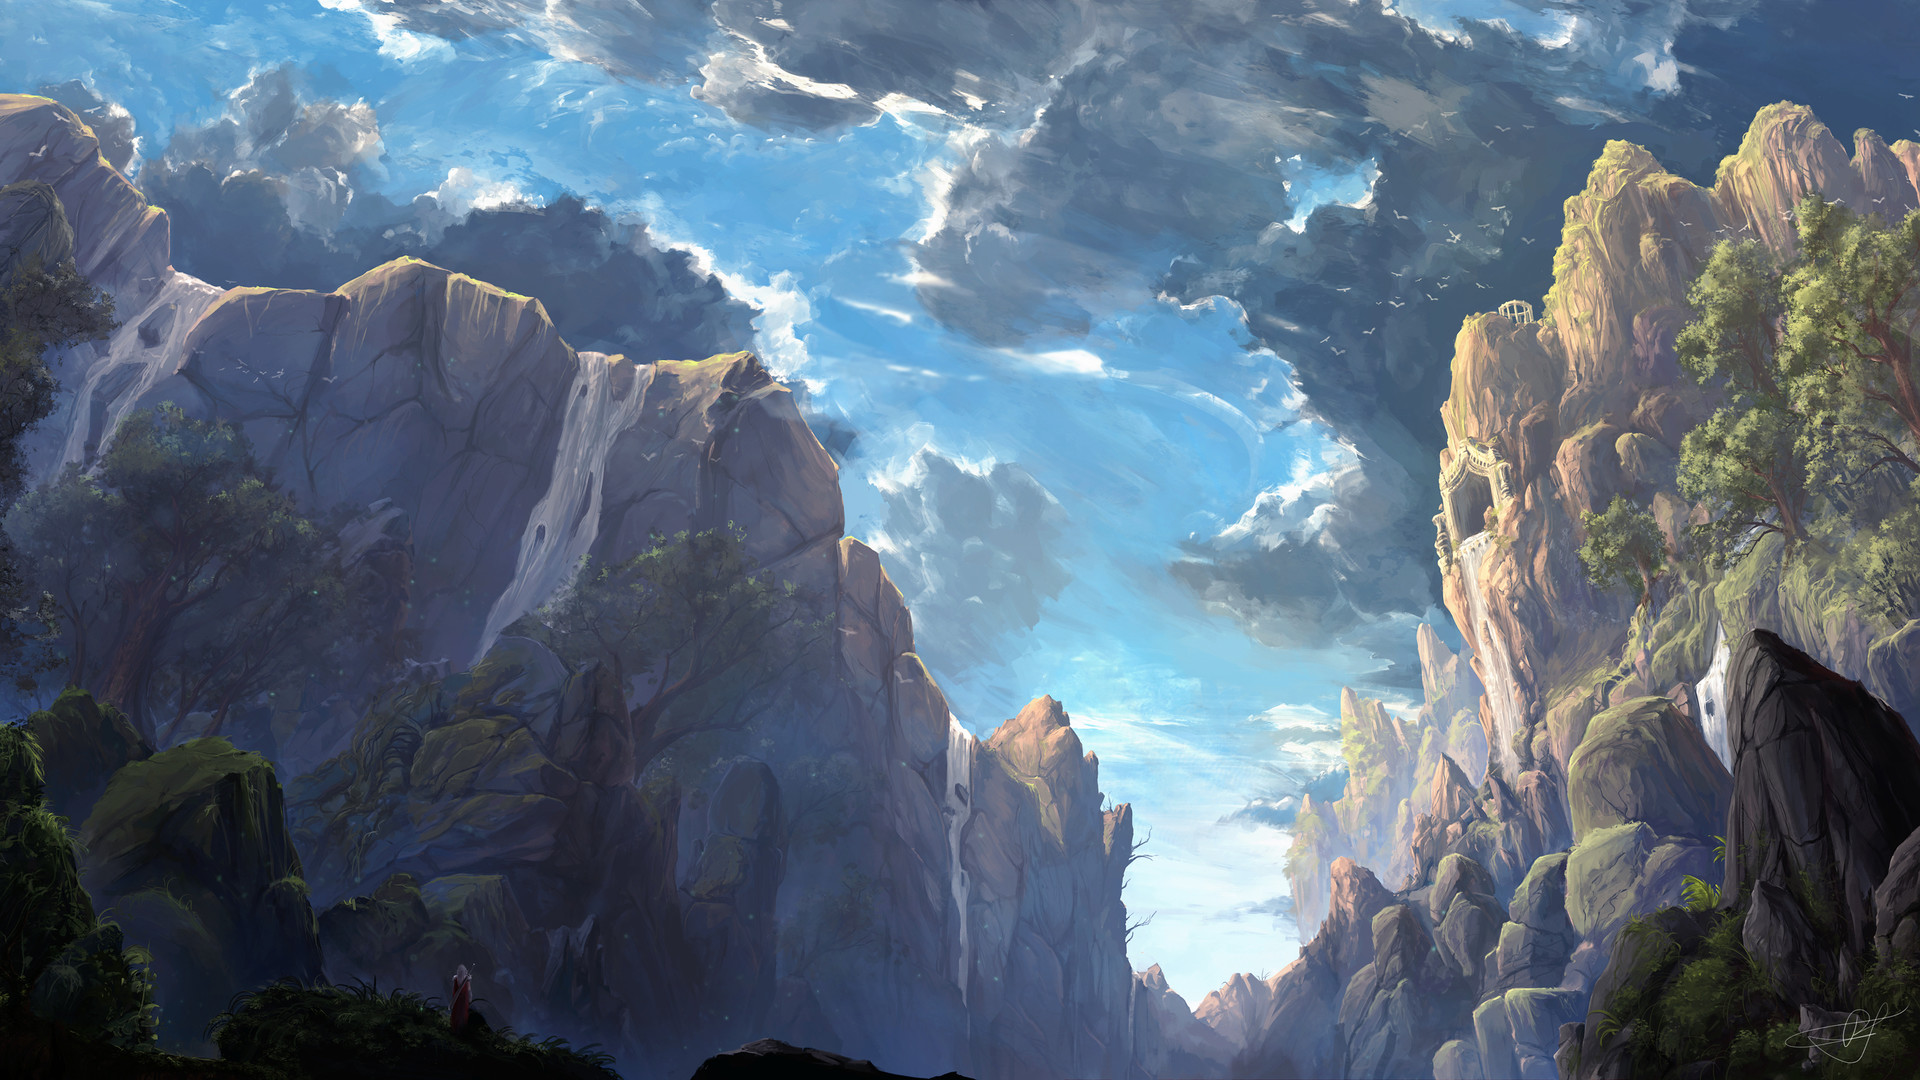 Max Suleimanov Digital Art Landscape Waterfall Clouds Surreal Trees Cliff Dwellings 1920x1080